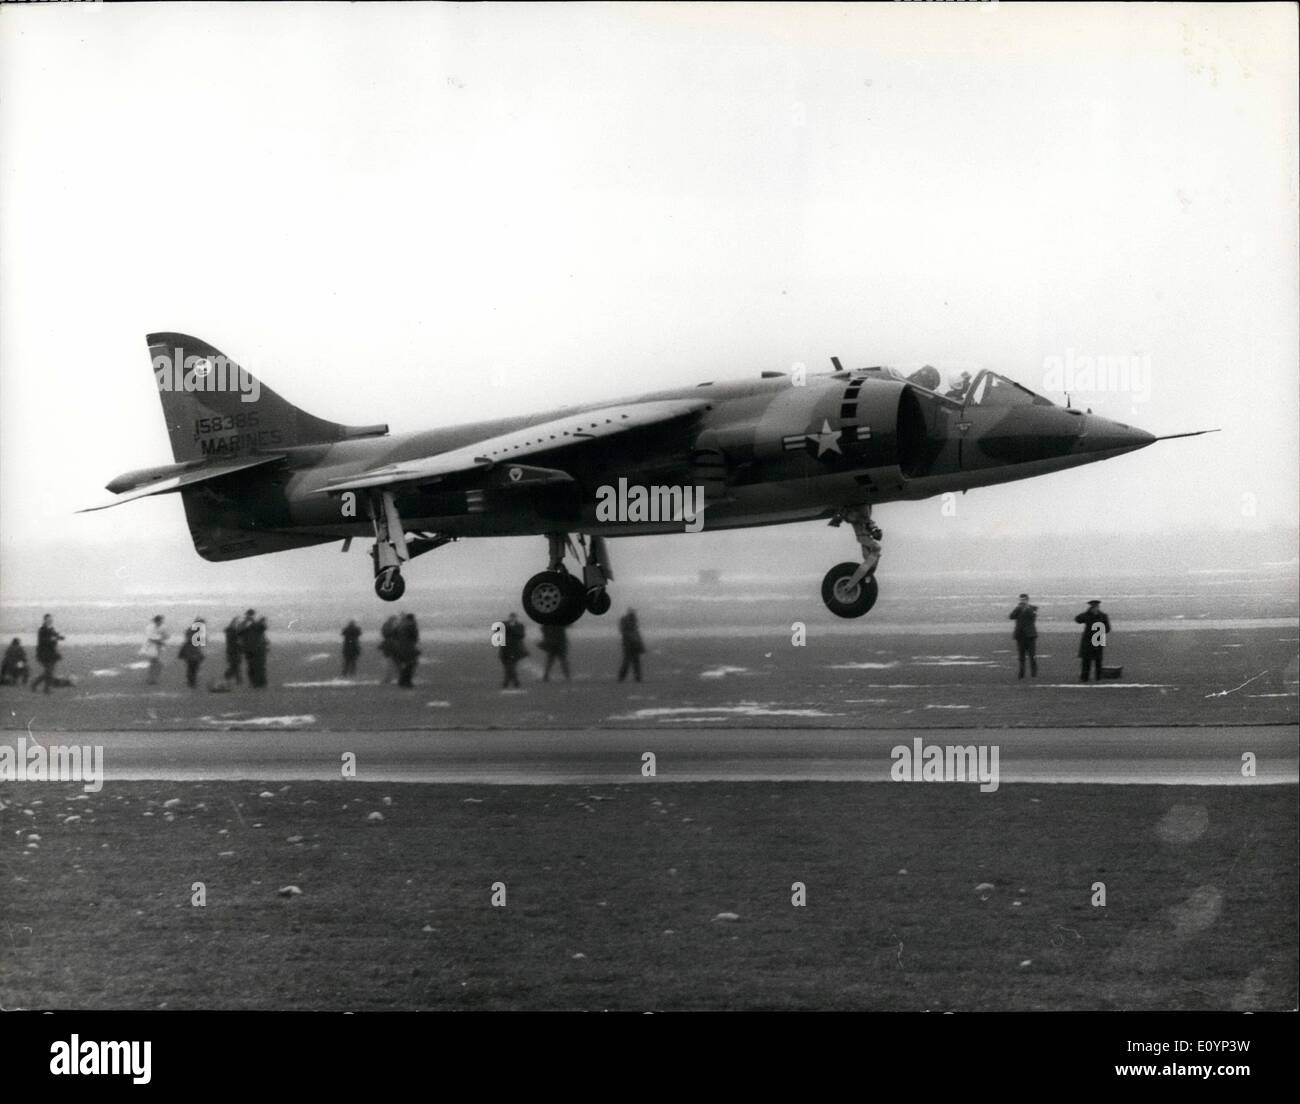 Jan. 01, 1971 - U.S. Marines Take Delivery of British Built Harrier. A Hawker Siddeley Harrier AV-8A vertical take off and landing strike aircraft, the first of 12 ordered for the United States Marine Corps, giving a demonstration flight at Dunsfold, Surrey, where it was handed over yesterday. It is the first time since the 1914-18 war that Britain has sold home built operational military aircraft to America. Stock Photo